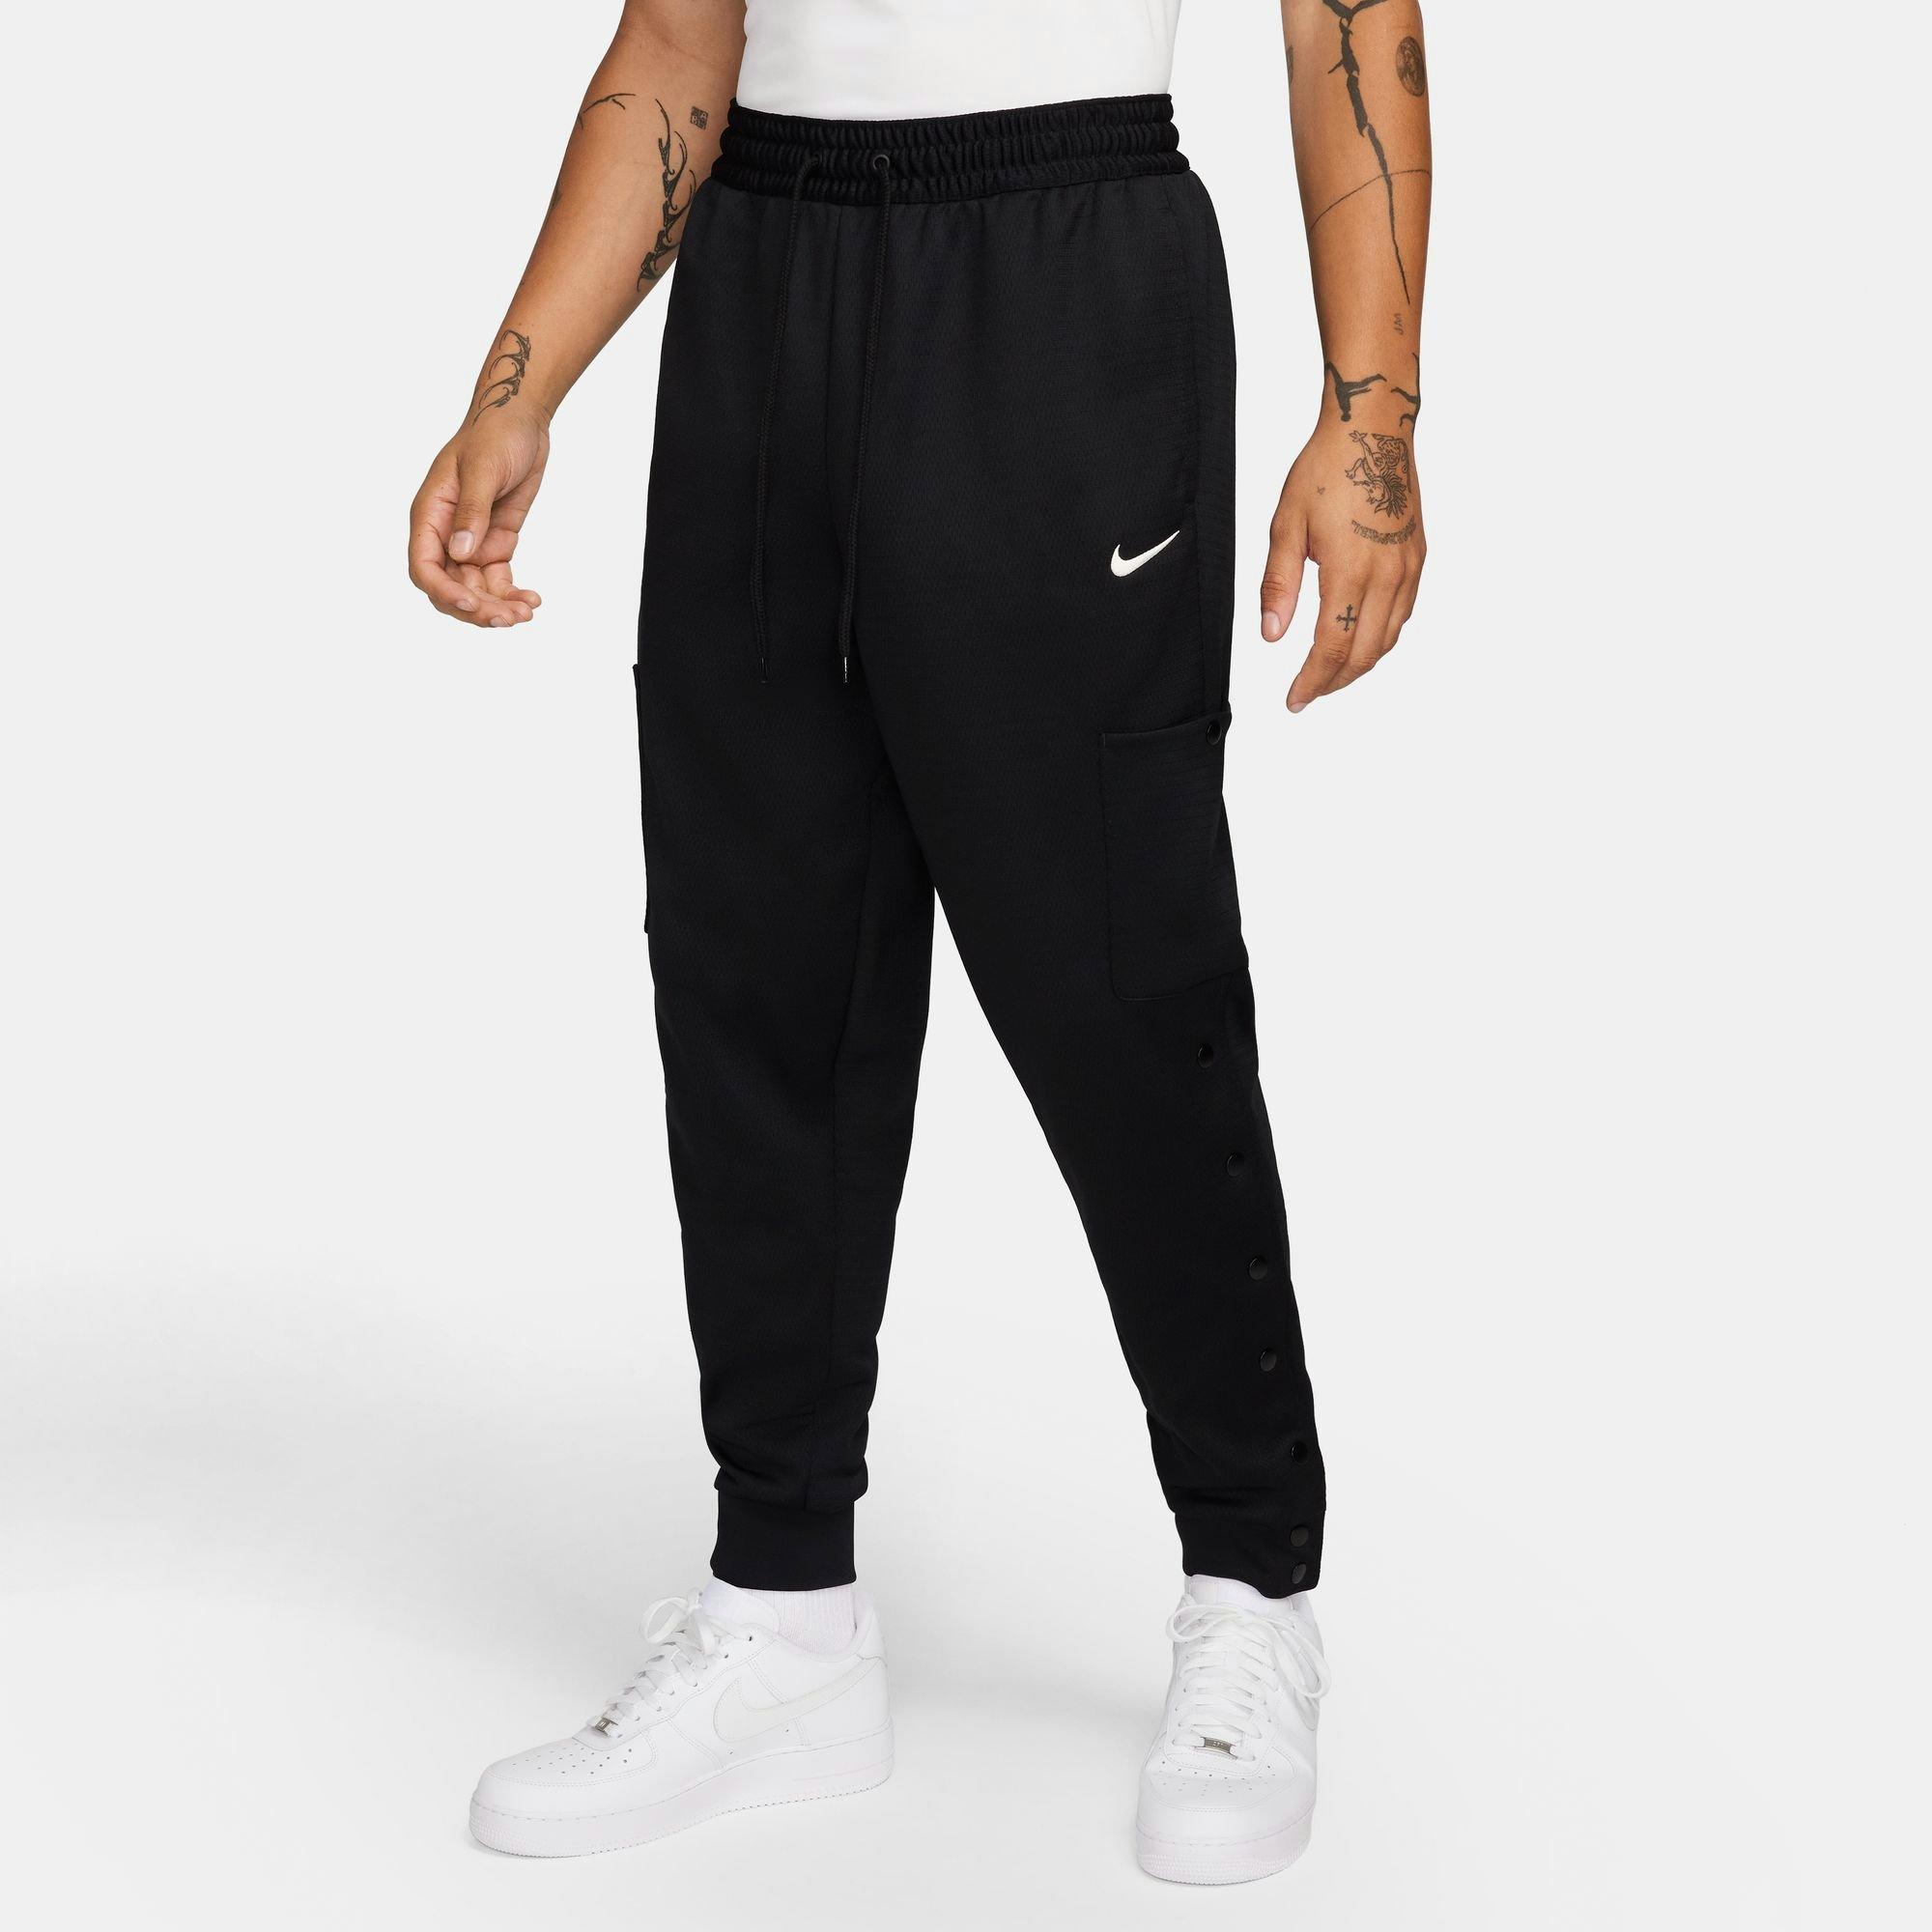 Men's Therma-FIT Cargo Pants from Nike